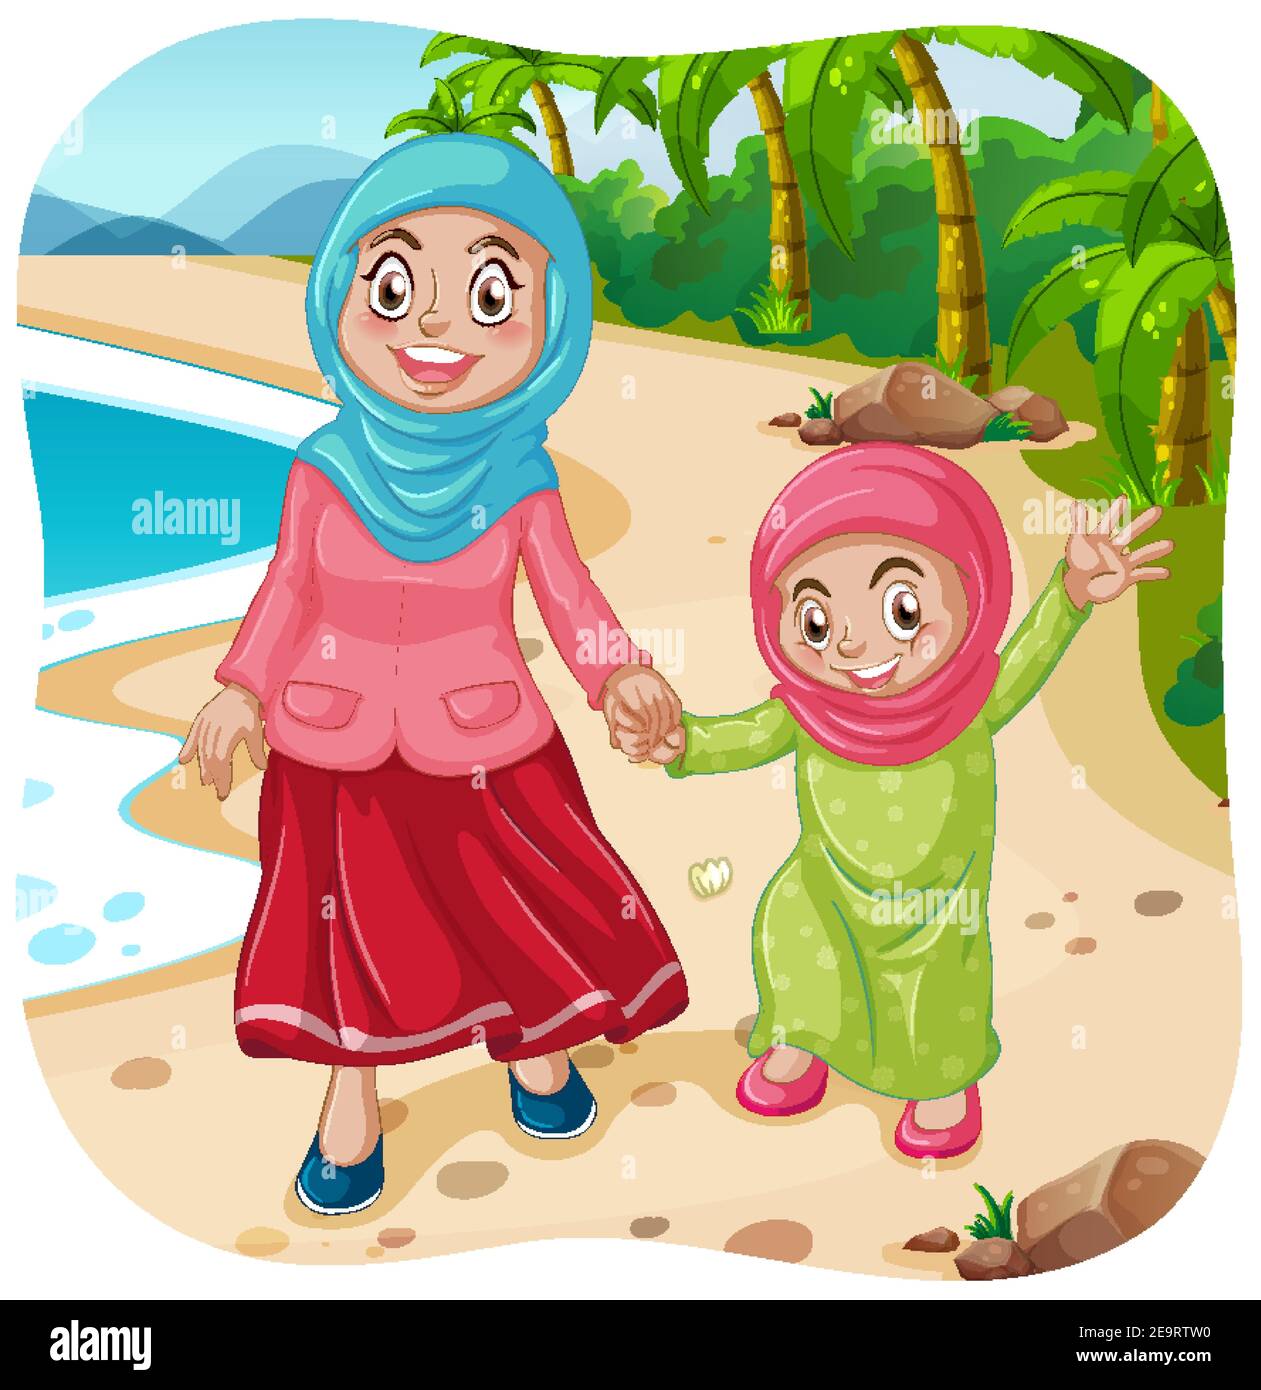 Muslim mother and daughter cartoon character illustration Stock Vector  Image & Art - Alamy